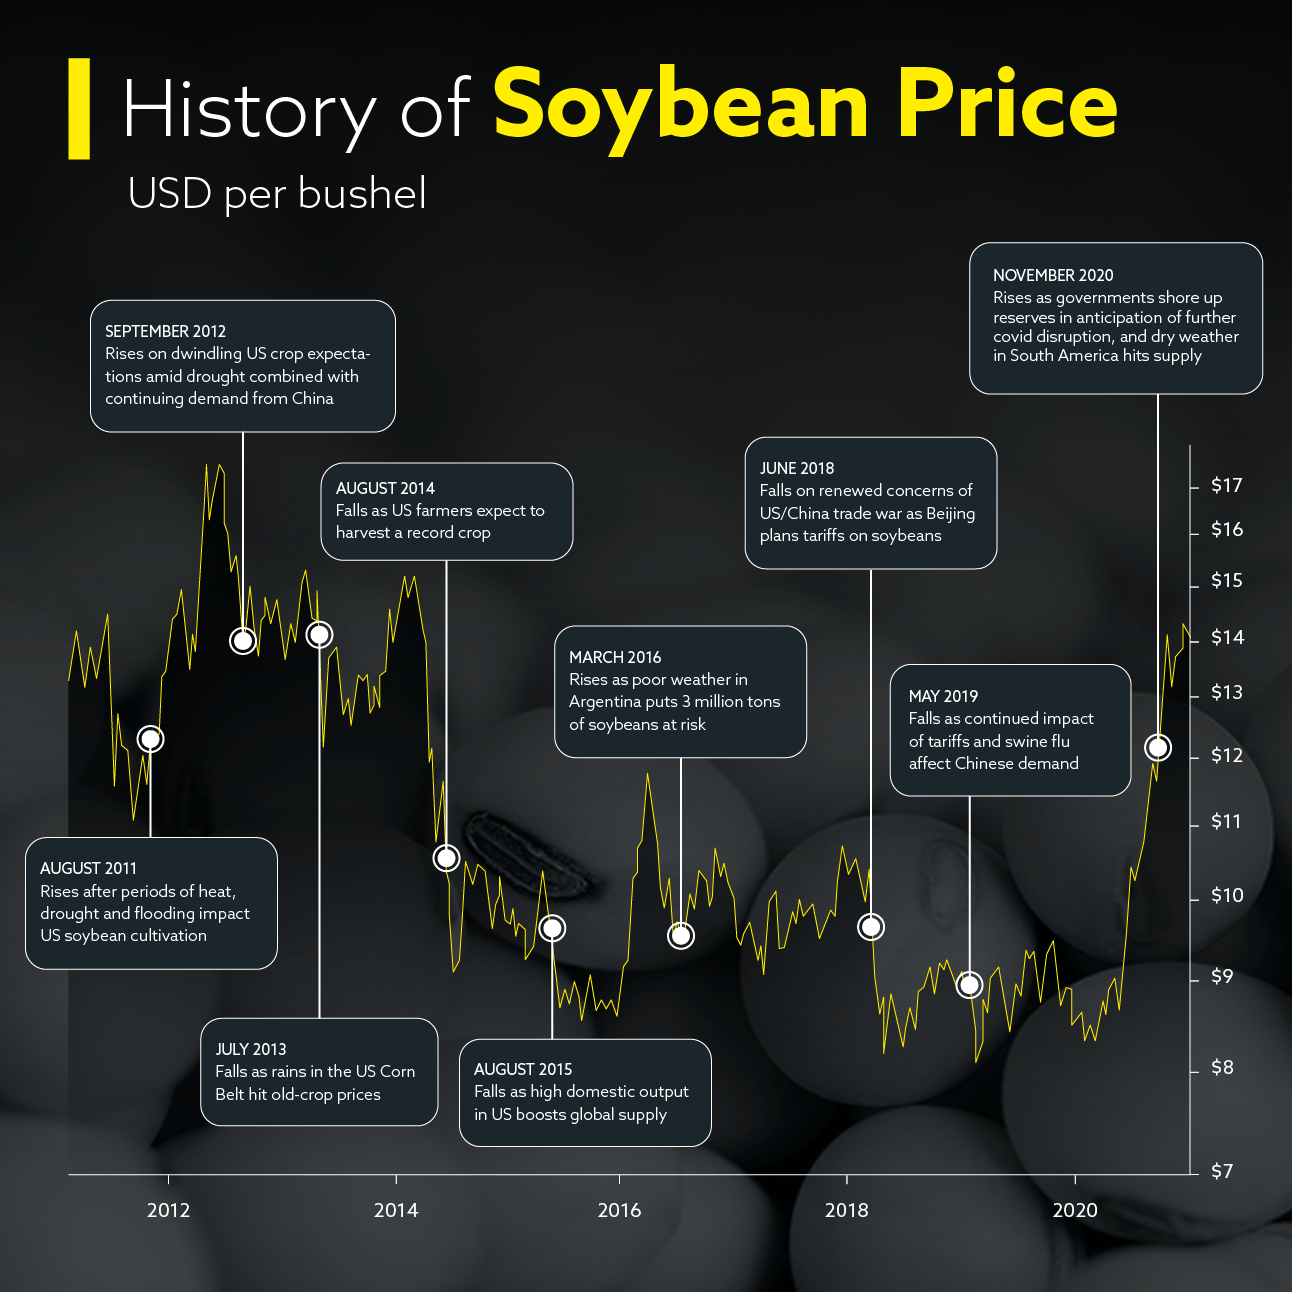 Soybean price history